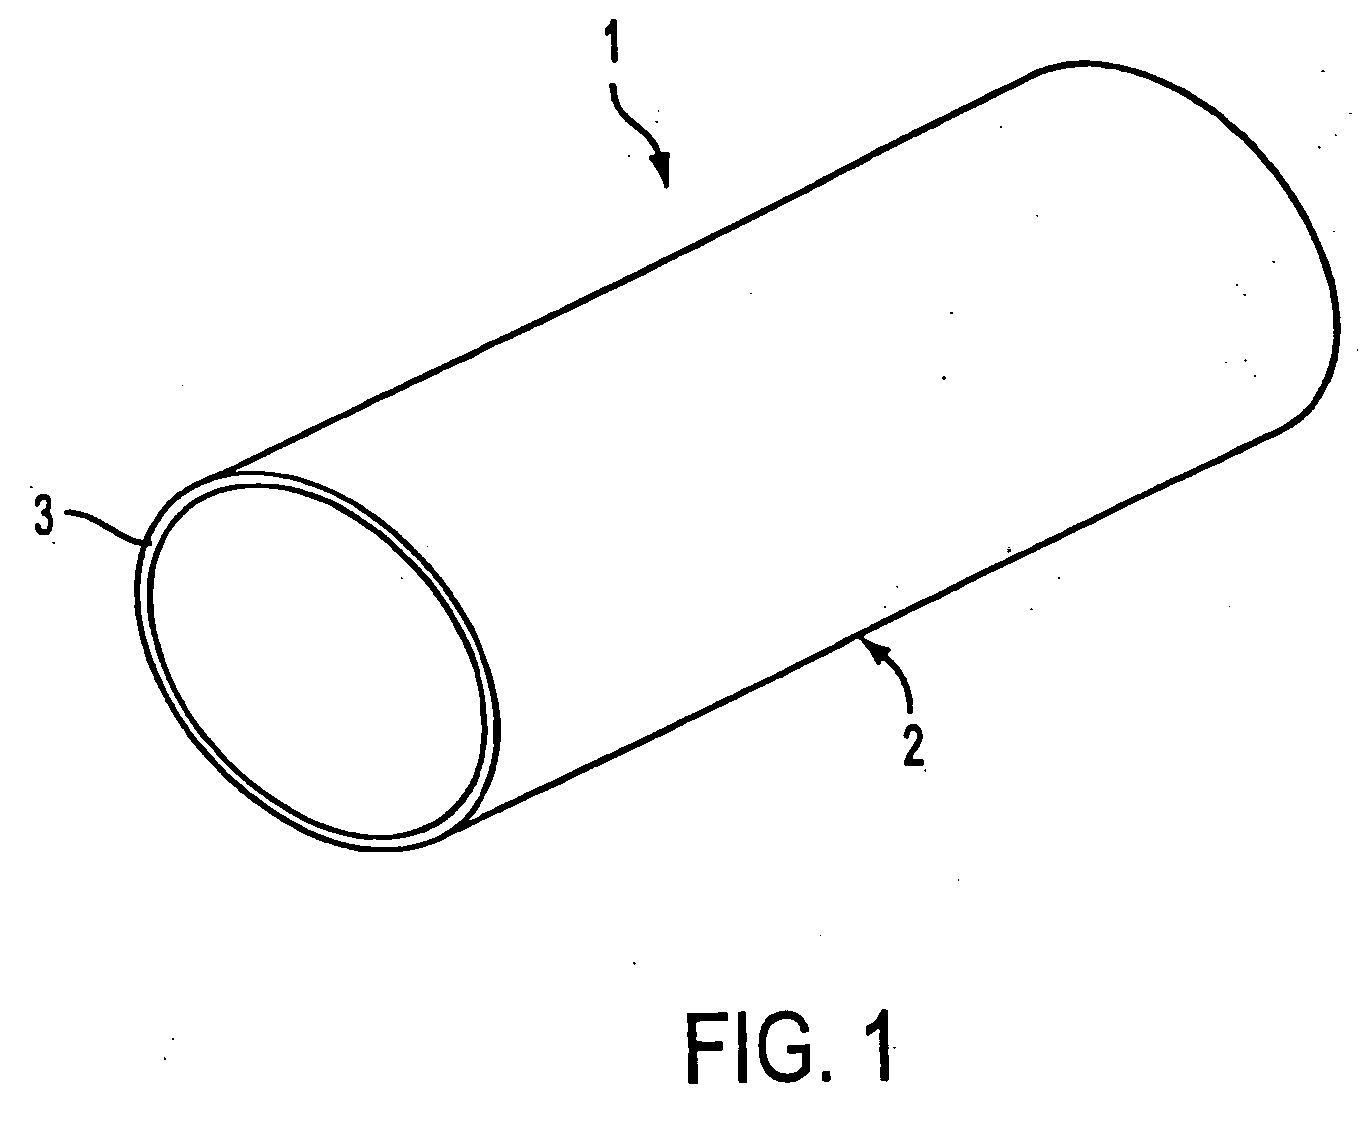 Methods and apparatus for a stent having an expandable web structure and delivery system